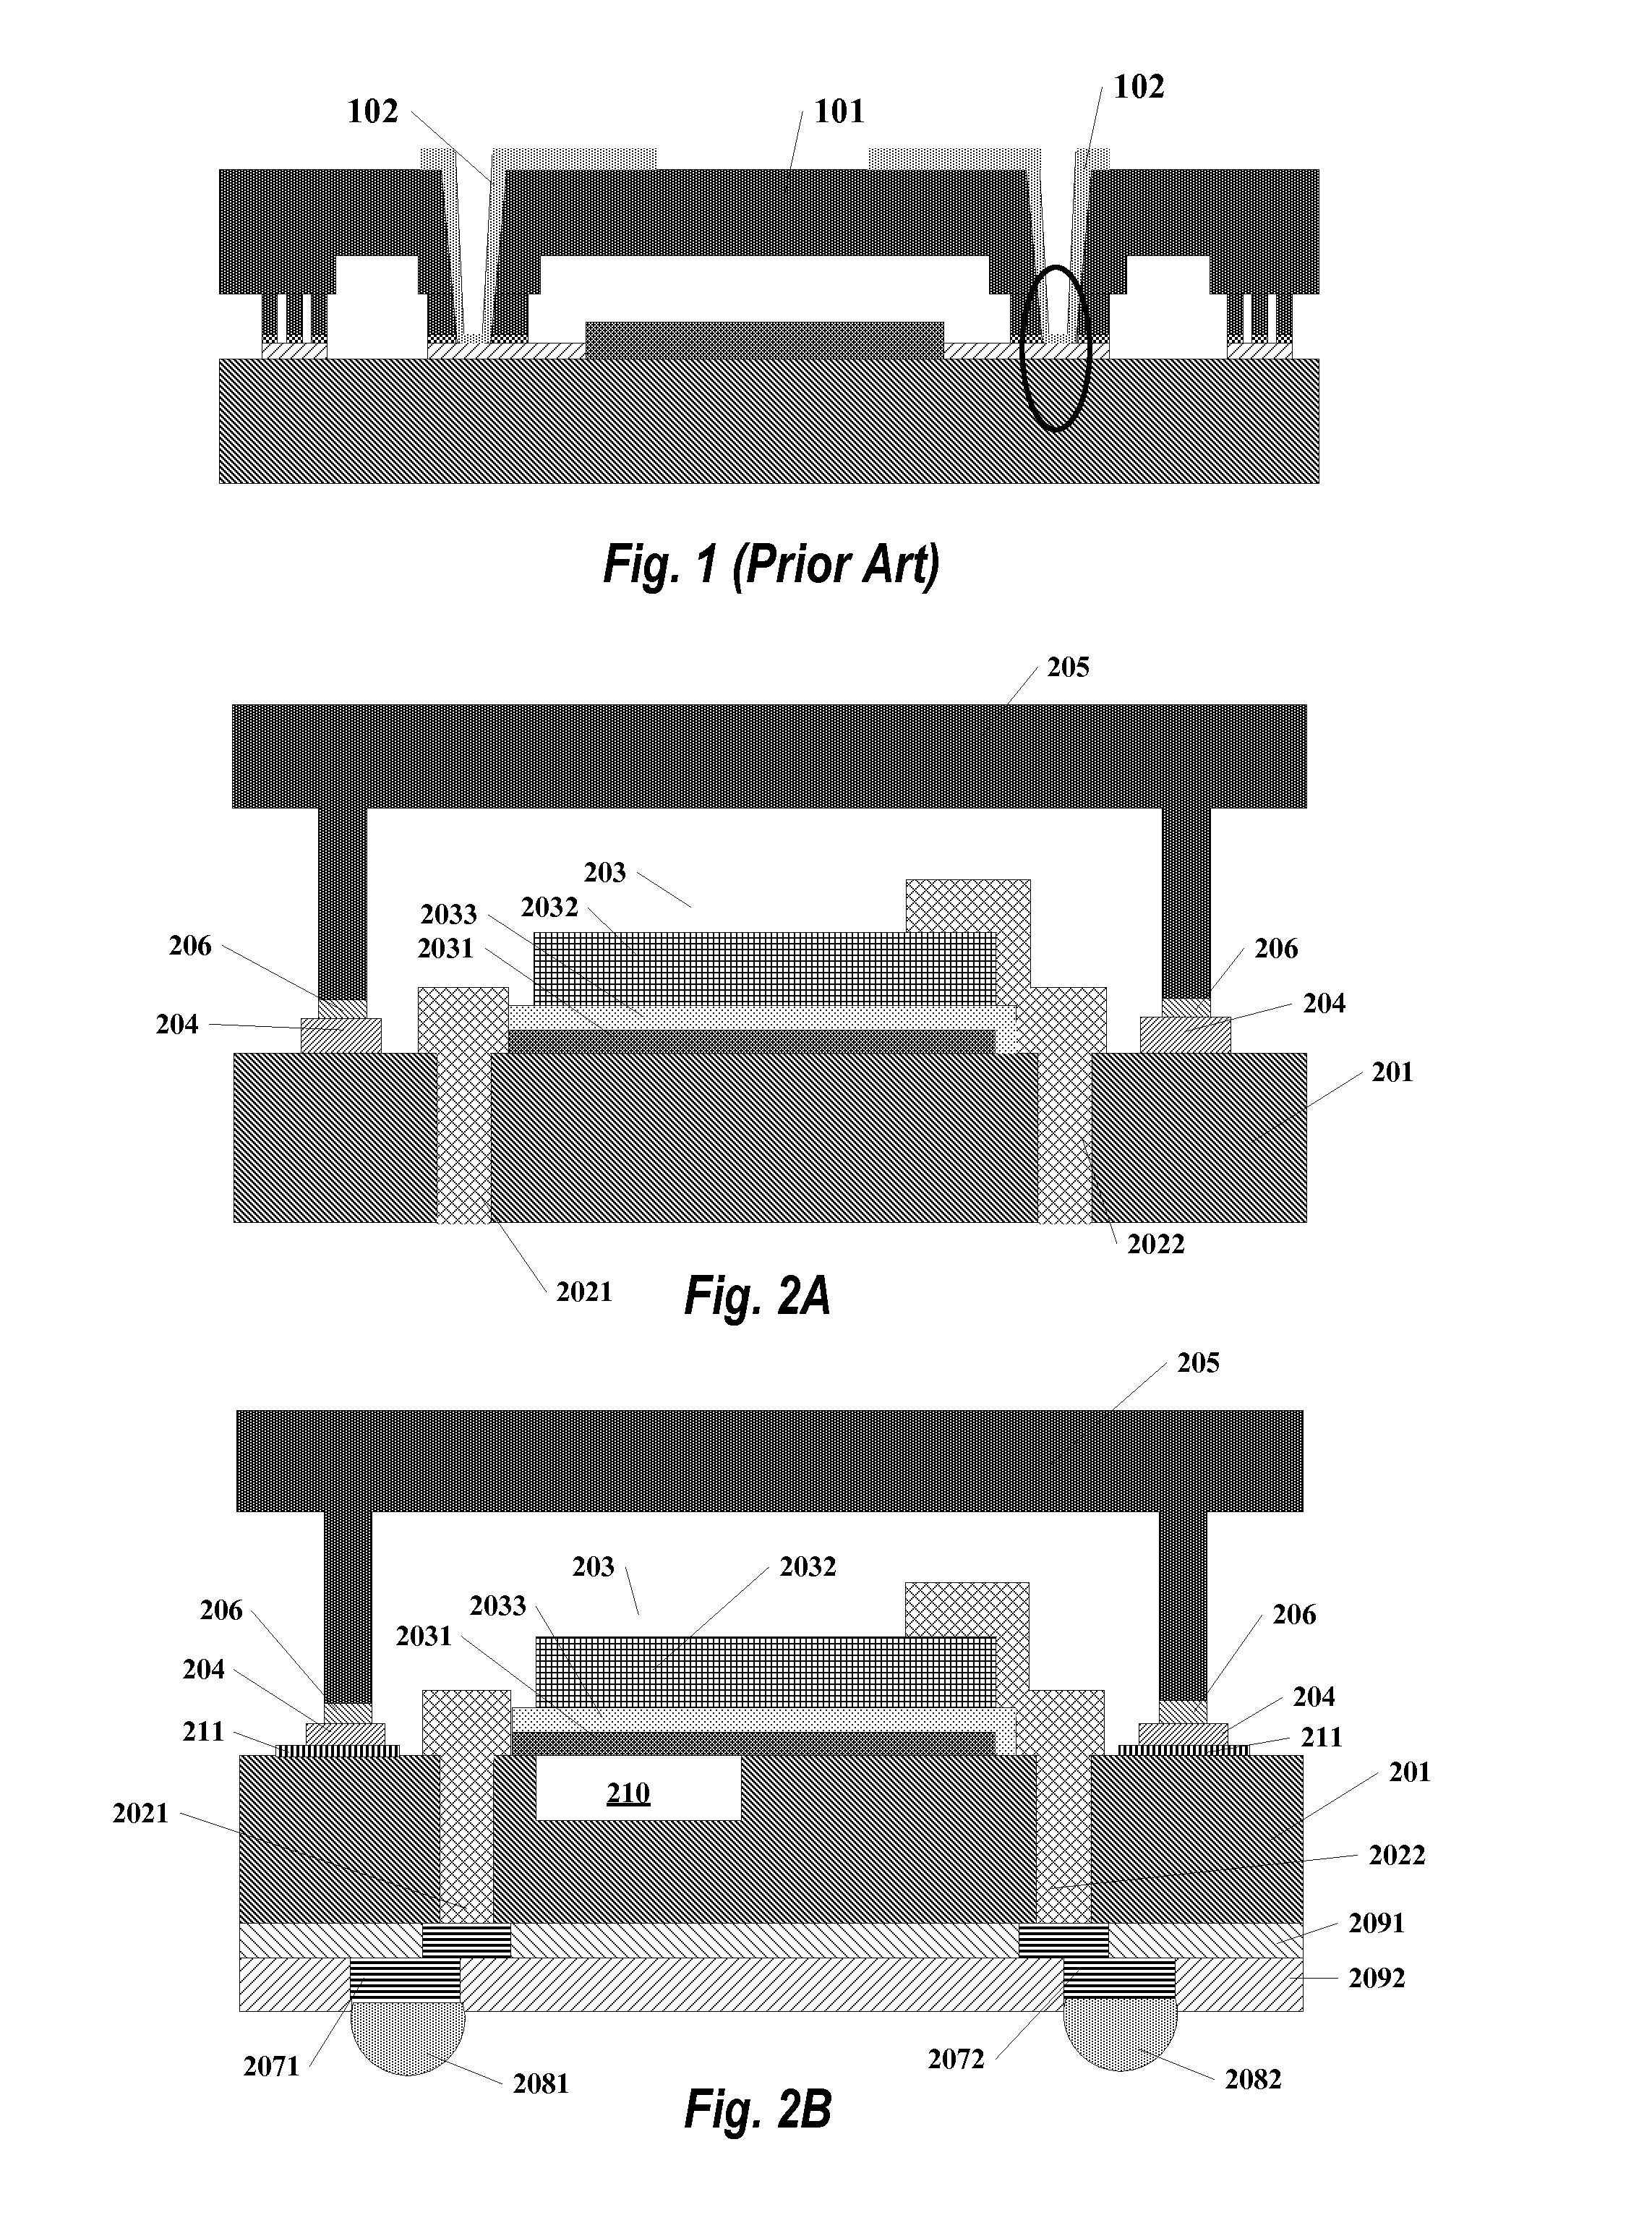 Wafer level packaging approach for semiconductor devices